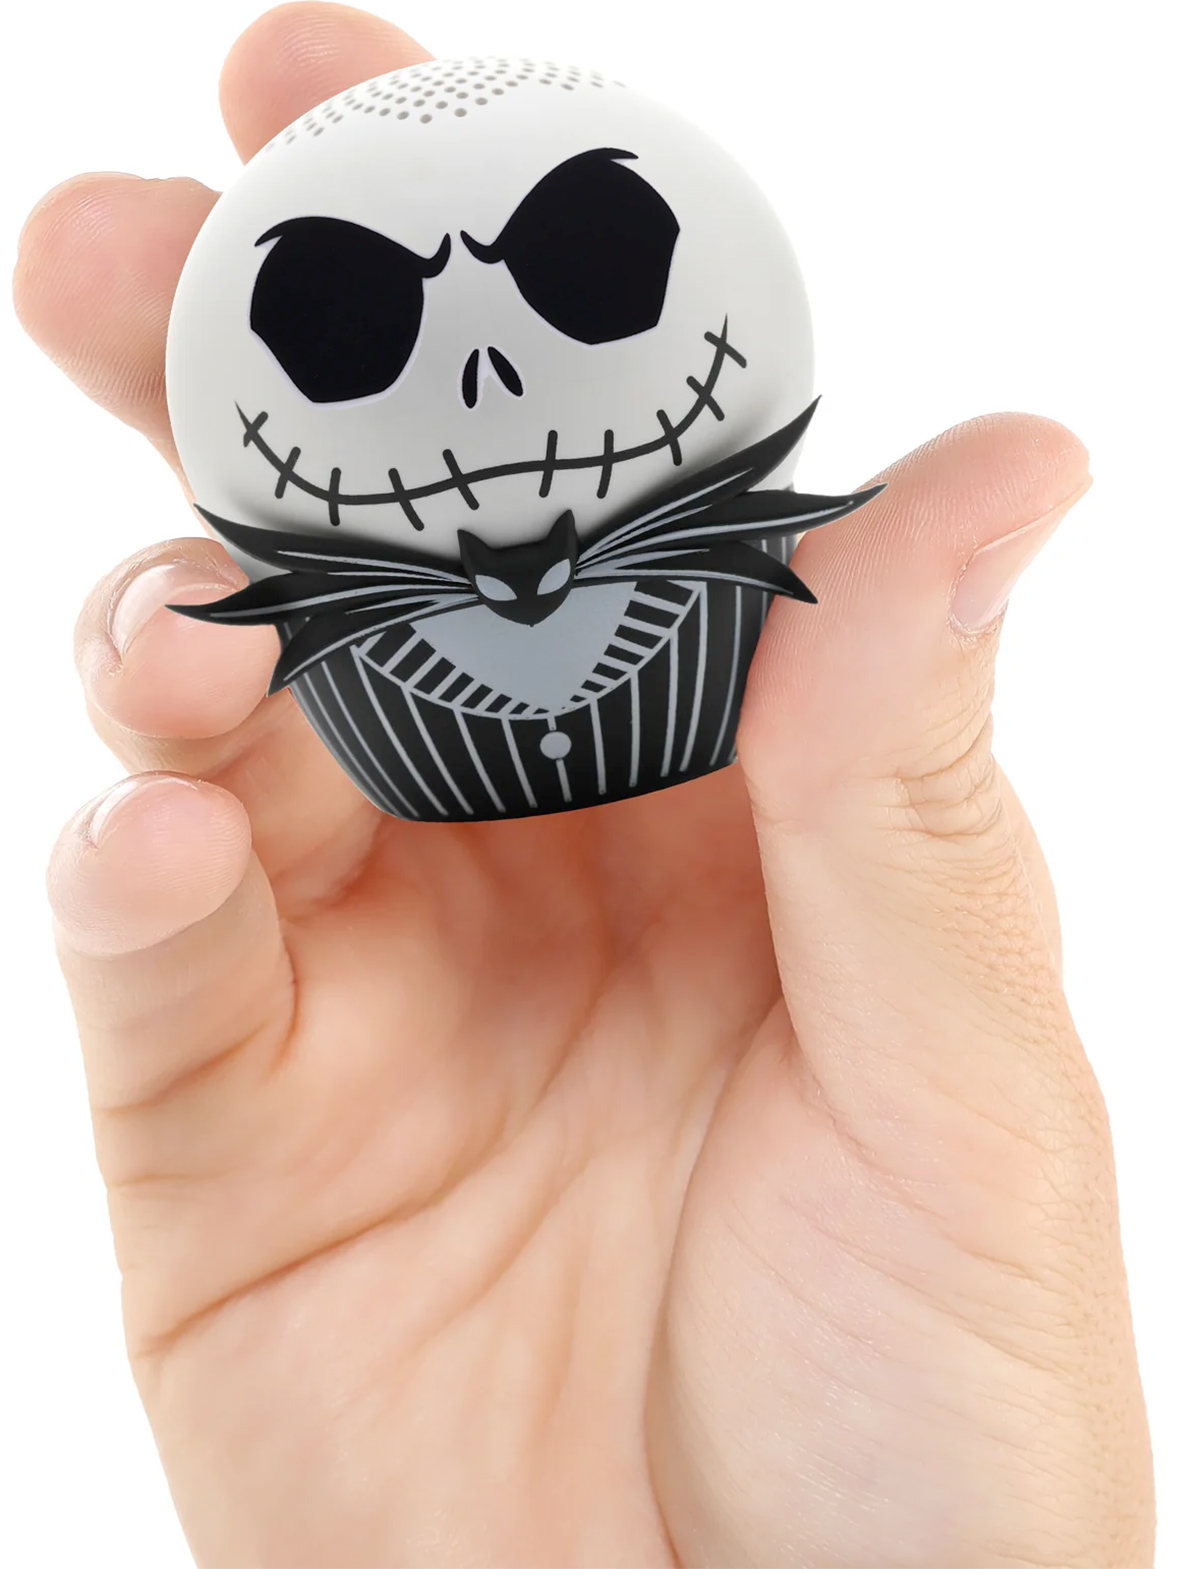 The Nightmare Before Christmas Bitty Boomers Bluetooth